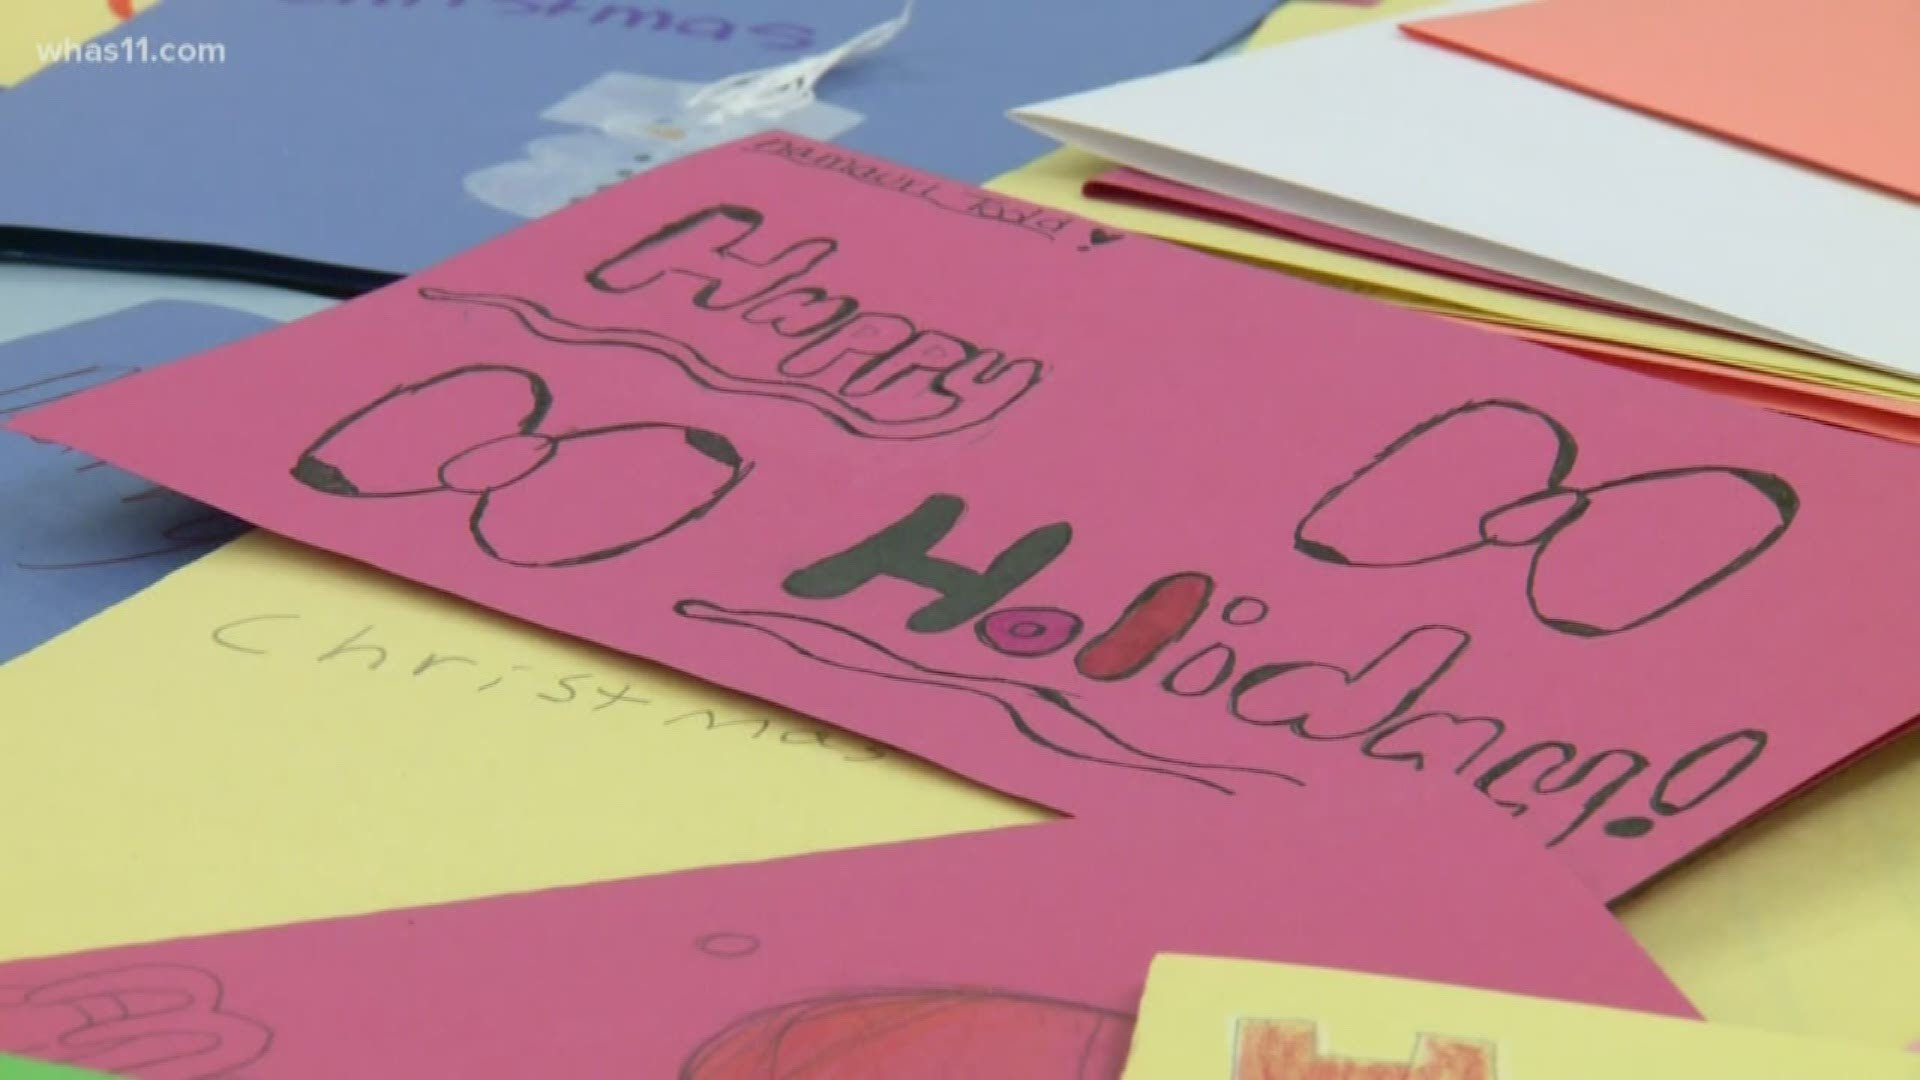 Jefferson County Public Schools partnered with Signature Healthcare to create thousands of cards for people who live in nursing homes.